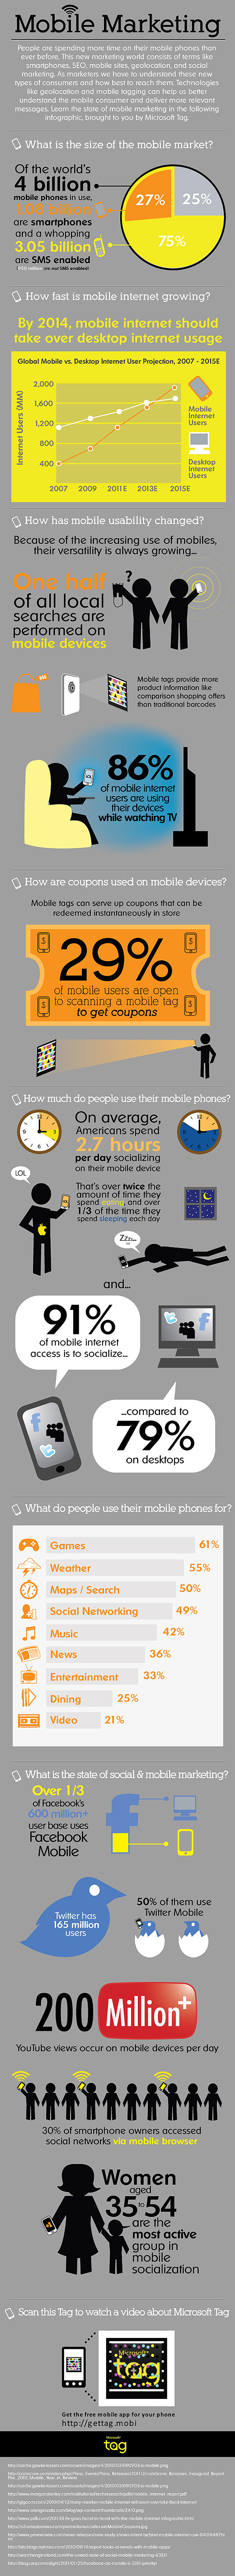 Infographic explaining the growing importance of mobile marketing